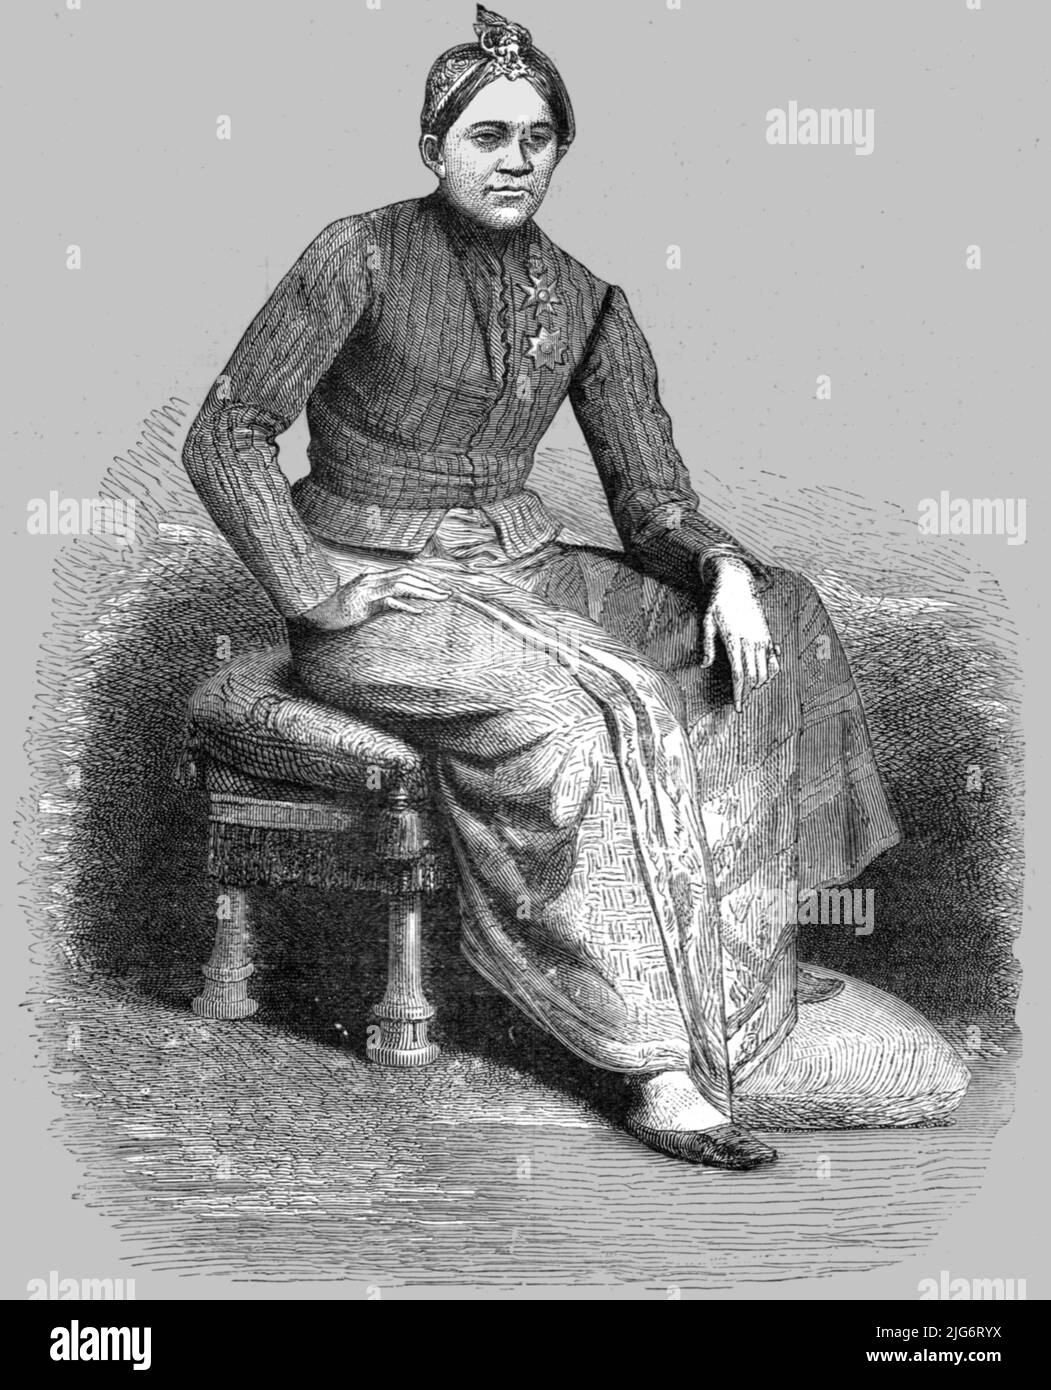 'The Sultan of Djokojokkarta, Java; A Visit to Borneo', 1875. [Possibly a portrait of Sri Sultan Hamengkubuwono VI, sixth sultan of Yogyakarta]. From, 'Illustrated Travels' by H.W. Bates. [Cassell, Petter, and Galpin, c1880, London] Belle Sauvage Works.London E.C. Stock Photo